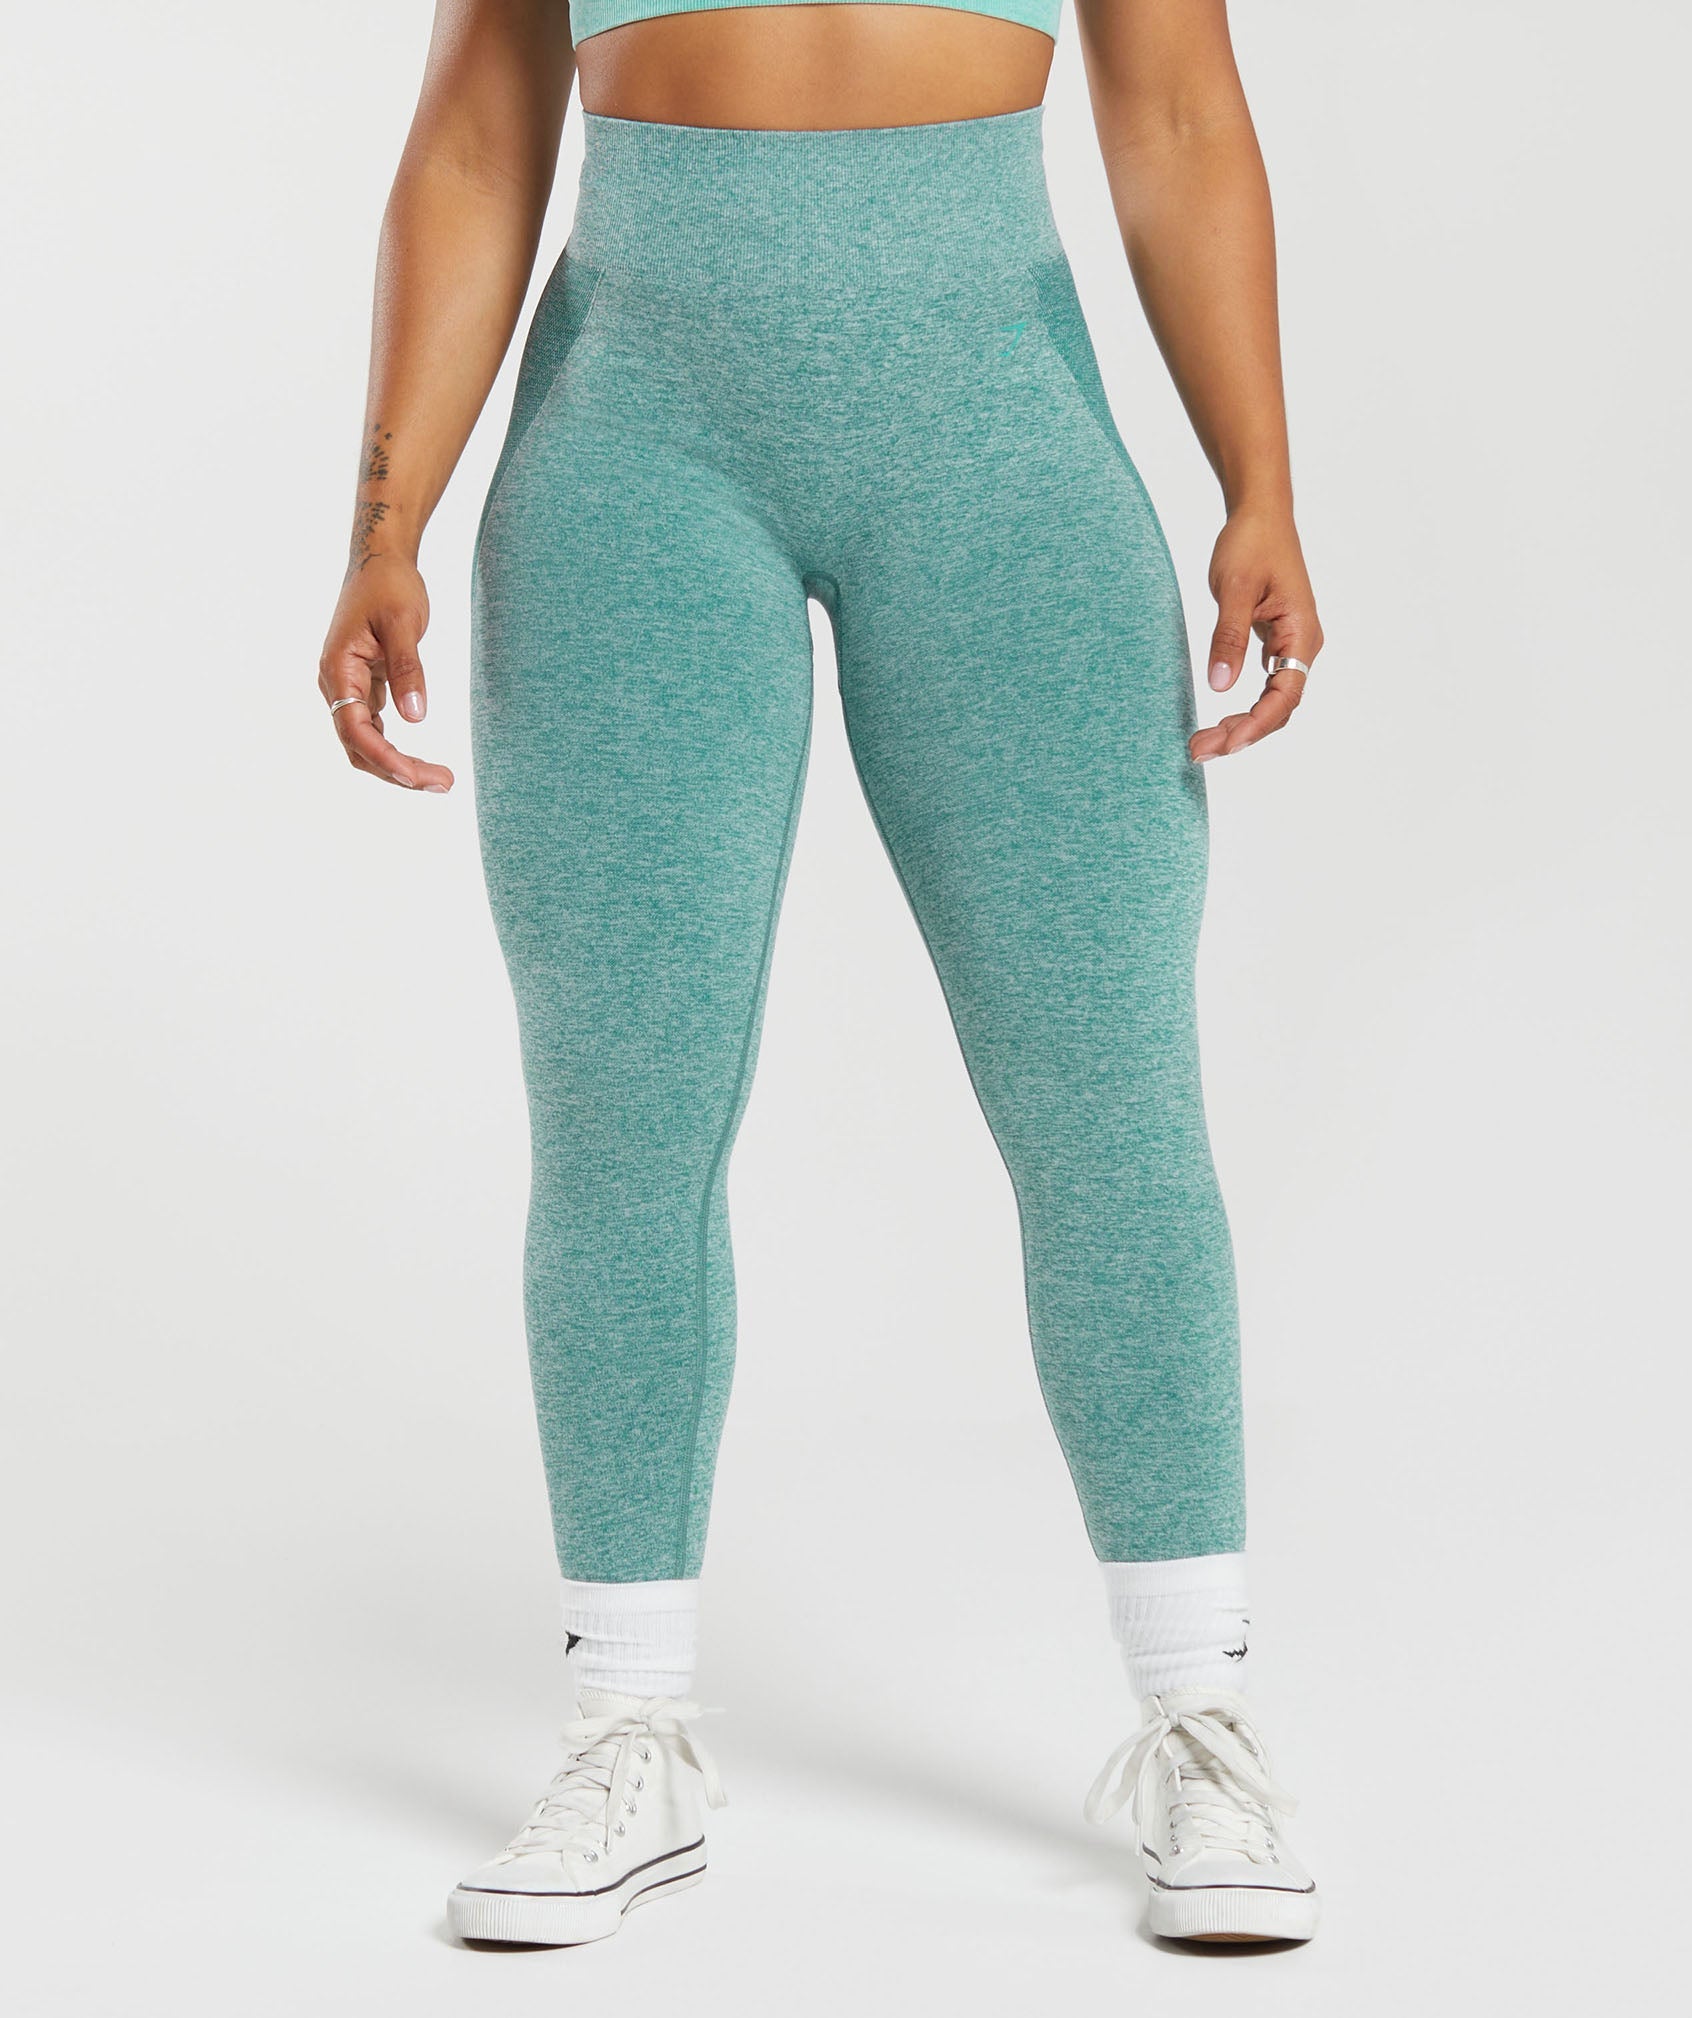 GYMSHARK FLEX HIGH WAISTED LEGGINGS— have these and love them, the